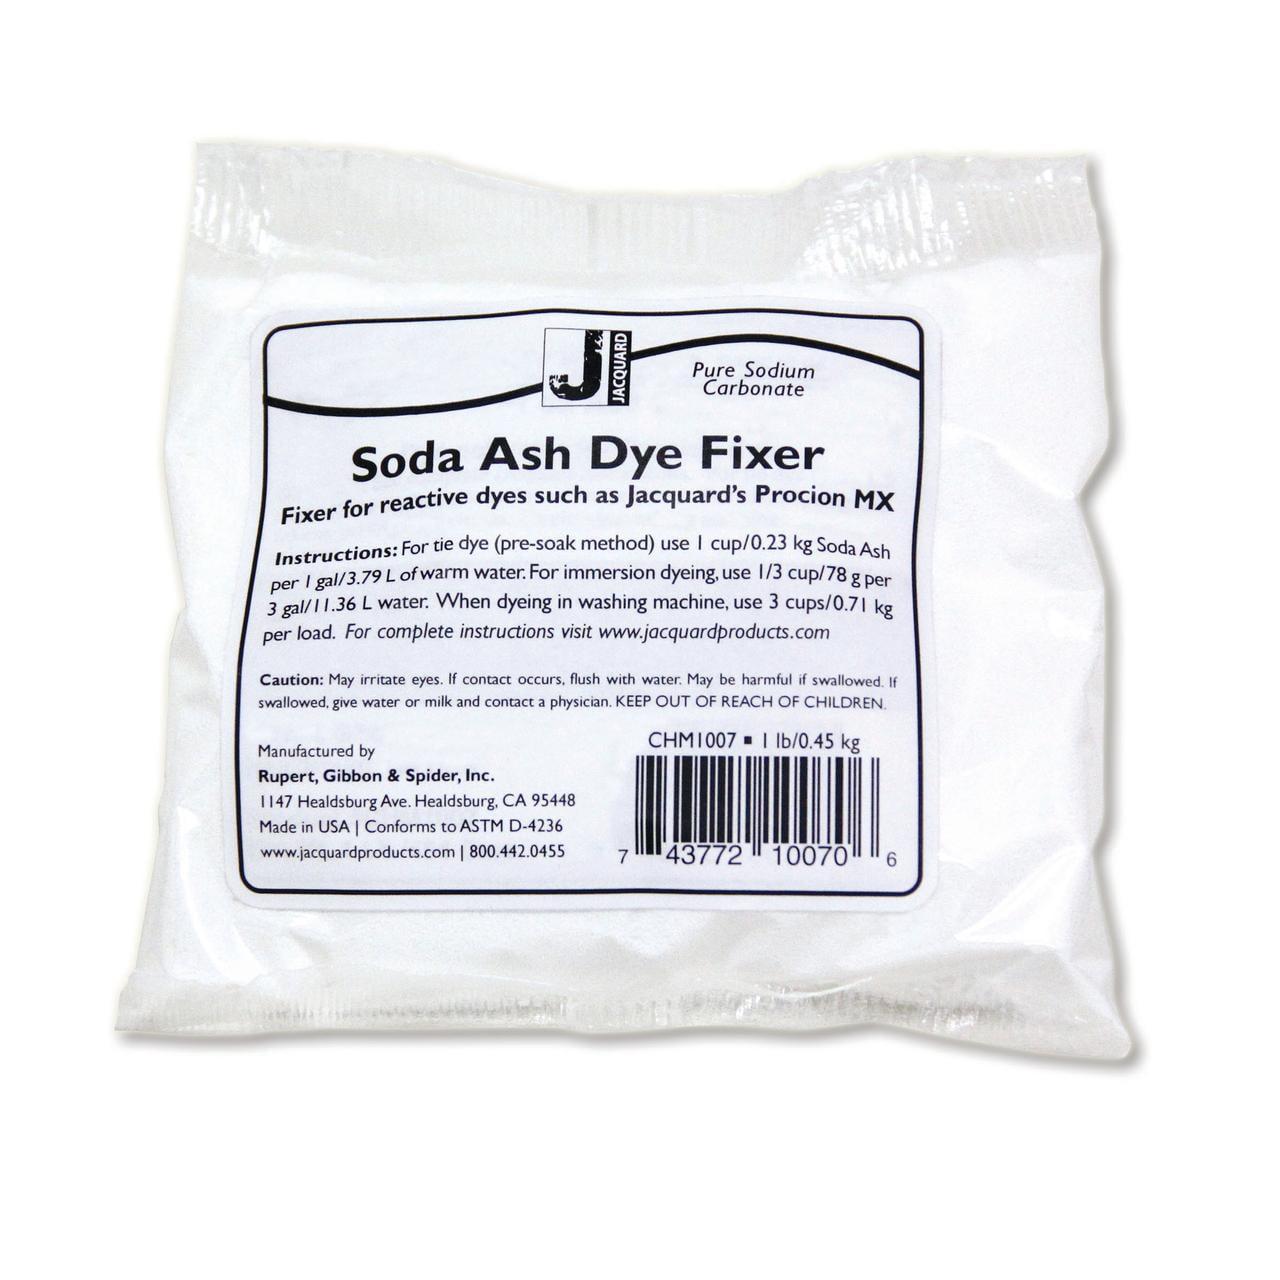 Soda Ash Easy ready to use supplies for beautiful at-home DIY tie-dye low-impact pro dyes SUMMER 2021 Colors Ice Dye Powder